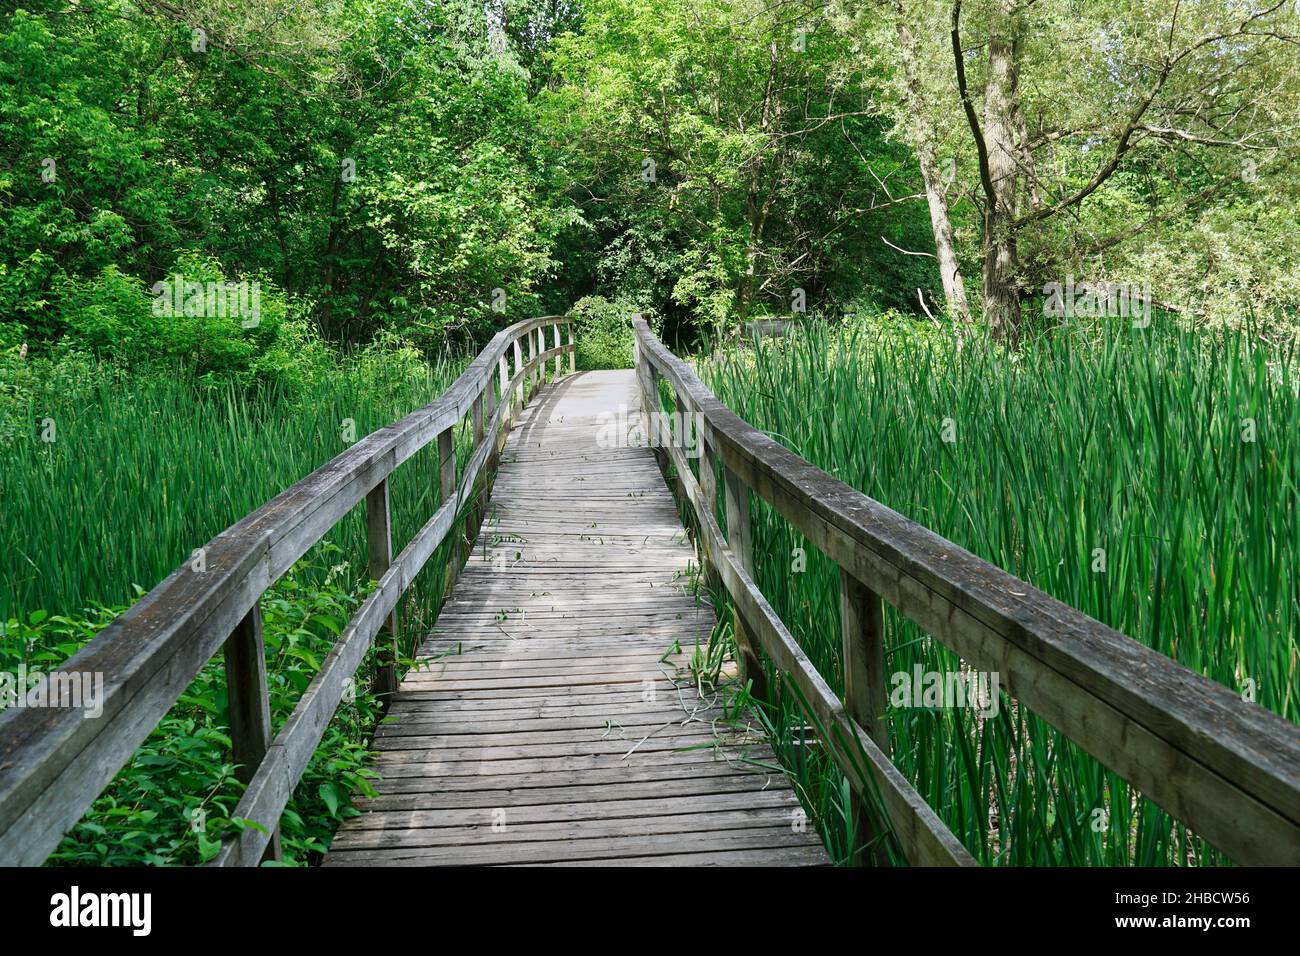 Boardwalk in a nature park across a natural wetland area Stock Photo